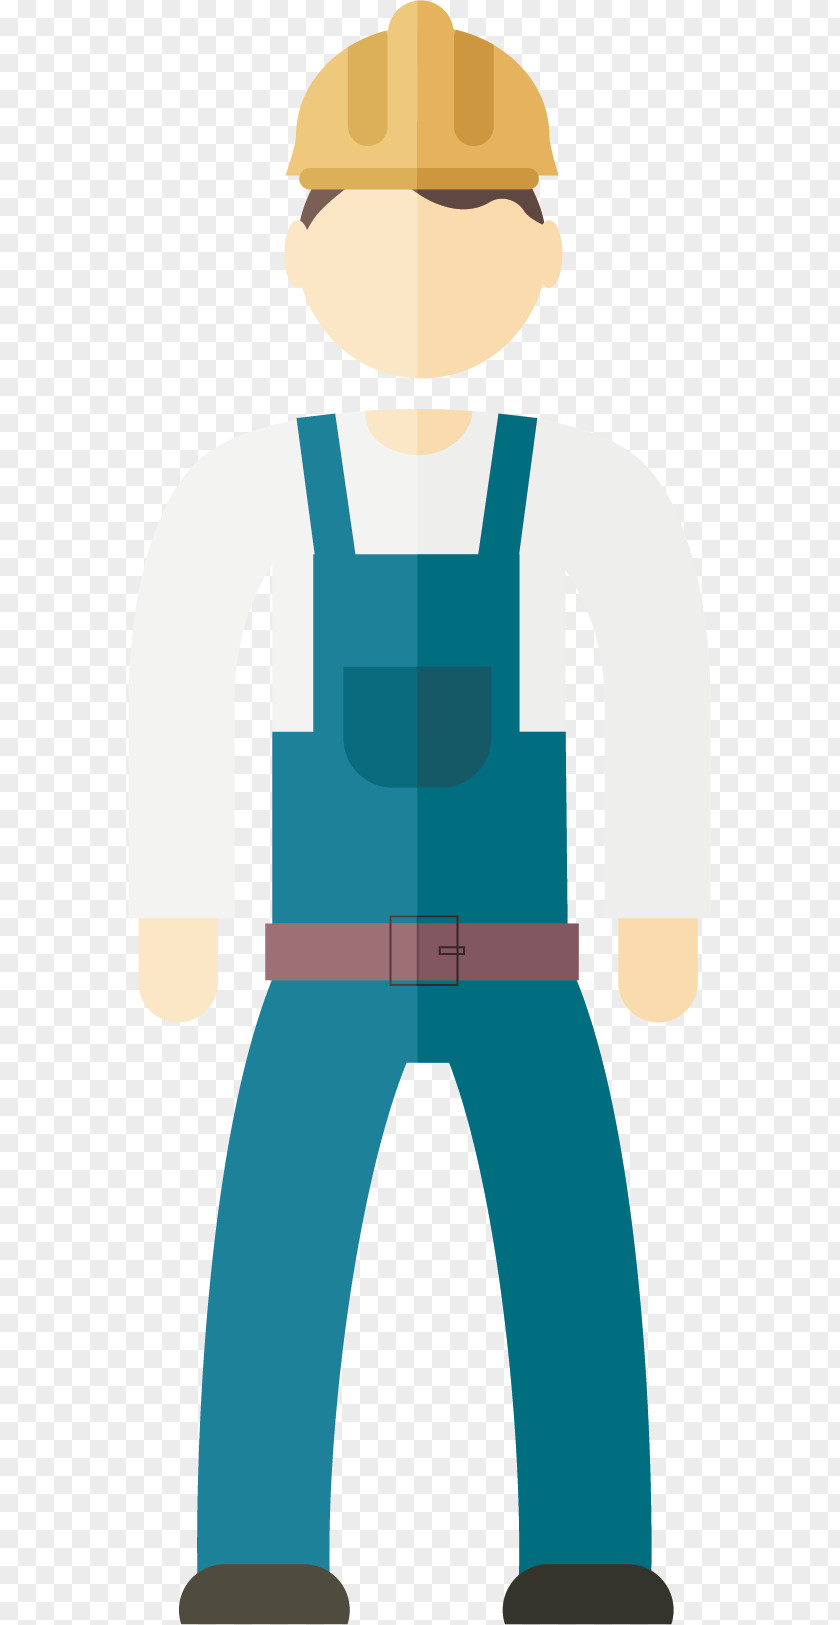 Cartoon Field Workers Laborer Construction Worker Illustration PNG